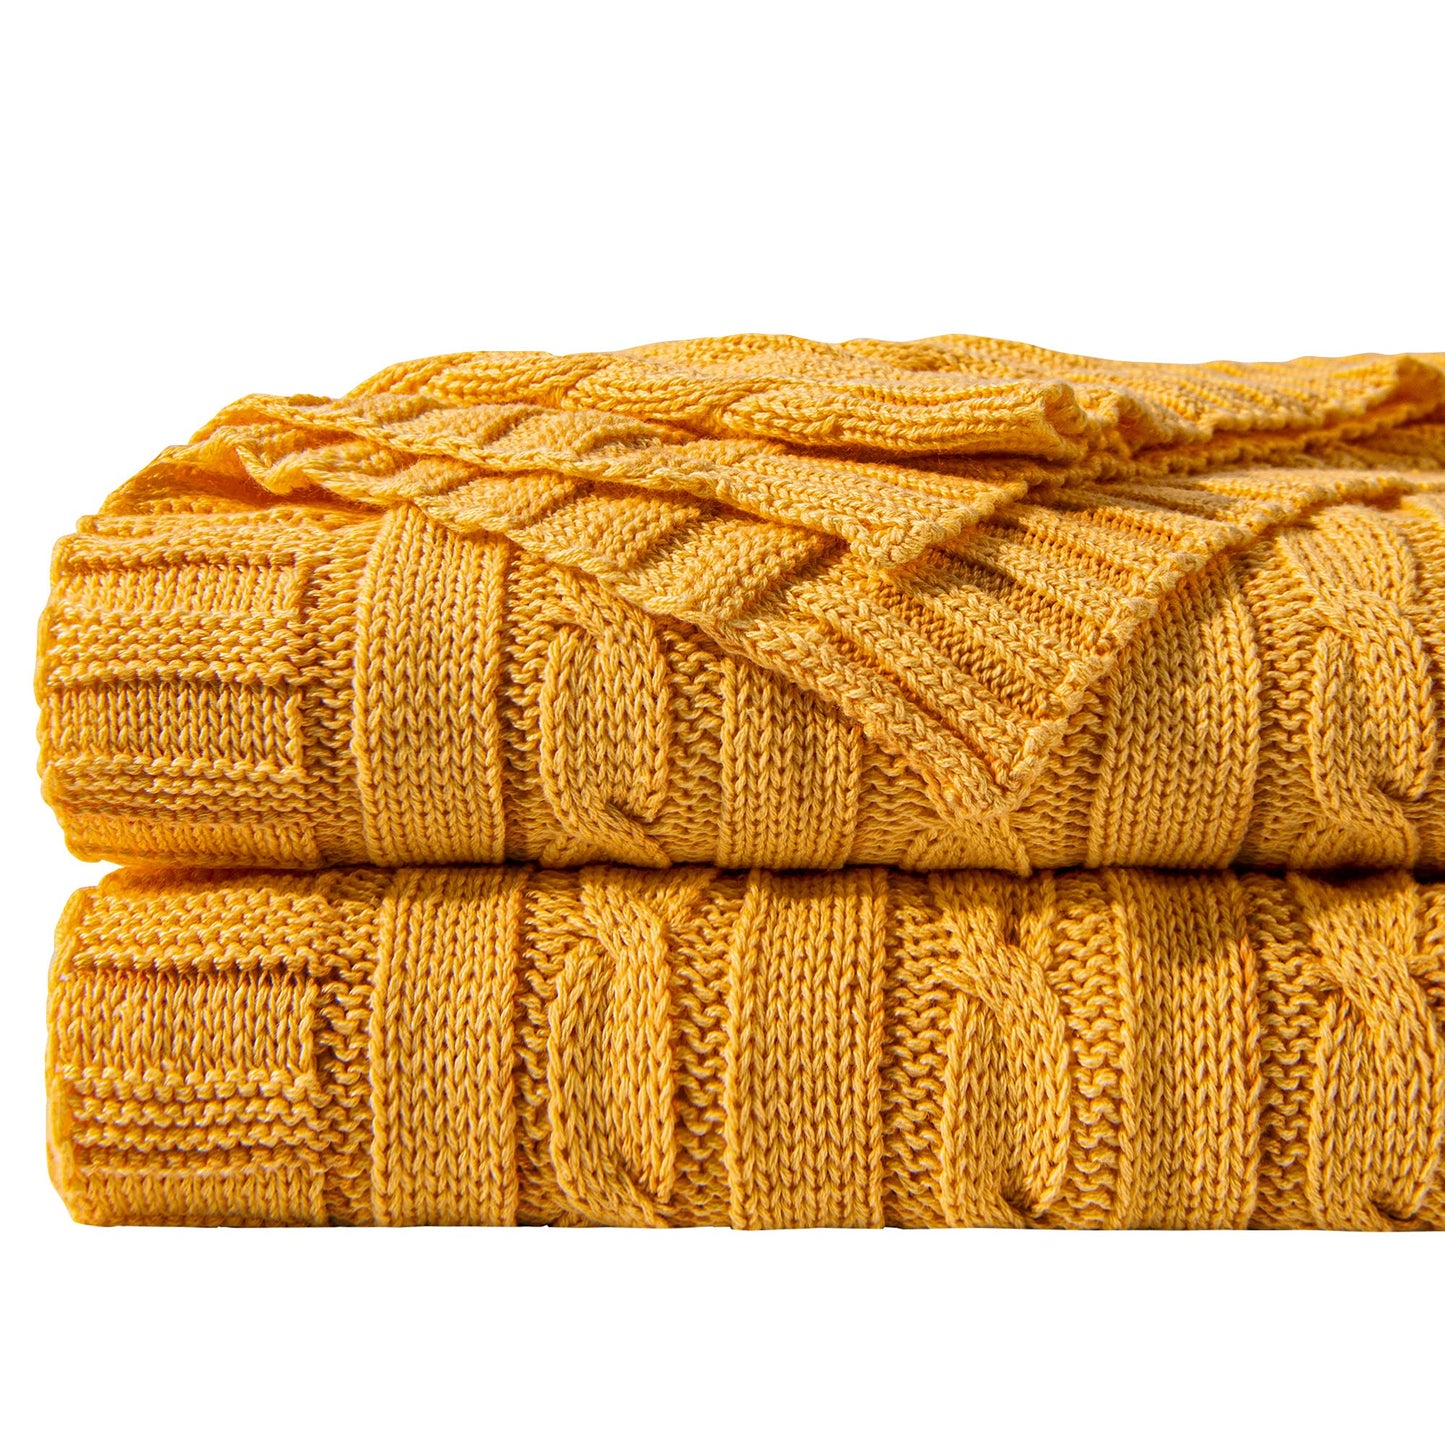 NTBAY 100% Pure Cotton Cable Knit Throw Blanket, Super Soft Warm 51x67 Knitted Throw Blanket for Couch, Sofa, Chair, Bed - Extra Cozy, Machine Washable, Comfortable Home Decor, Ginger Yellow